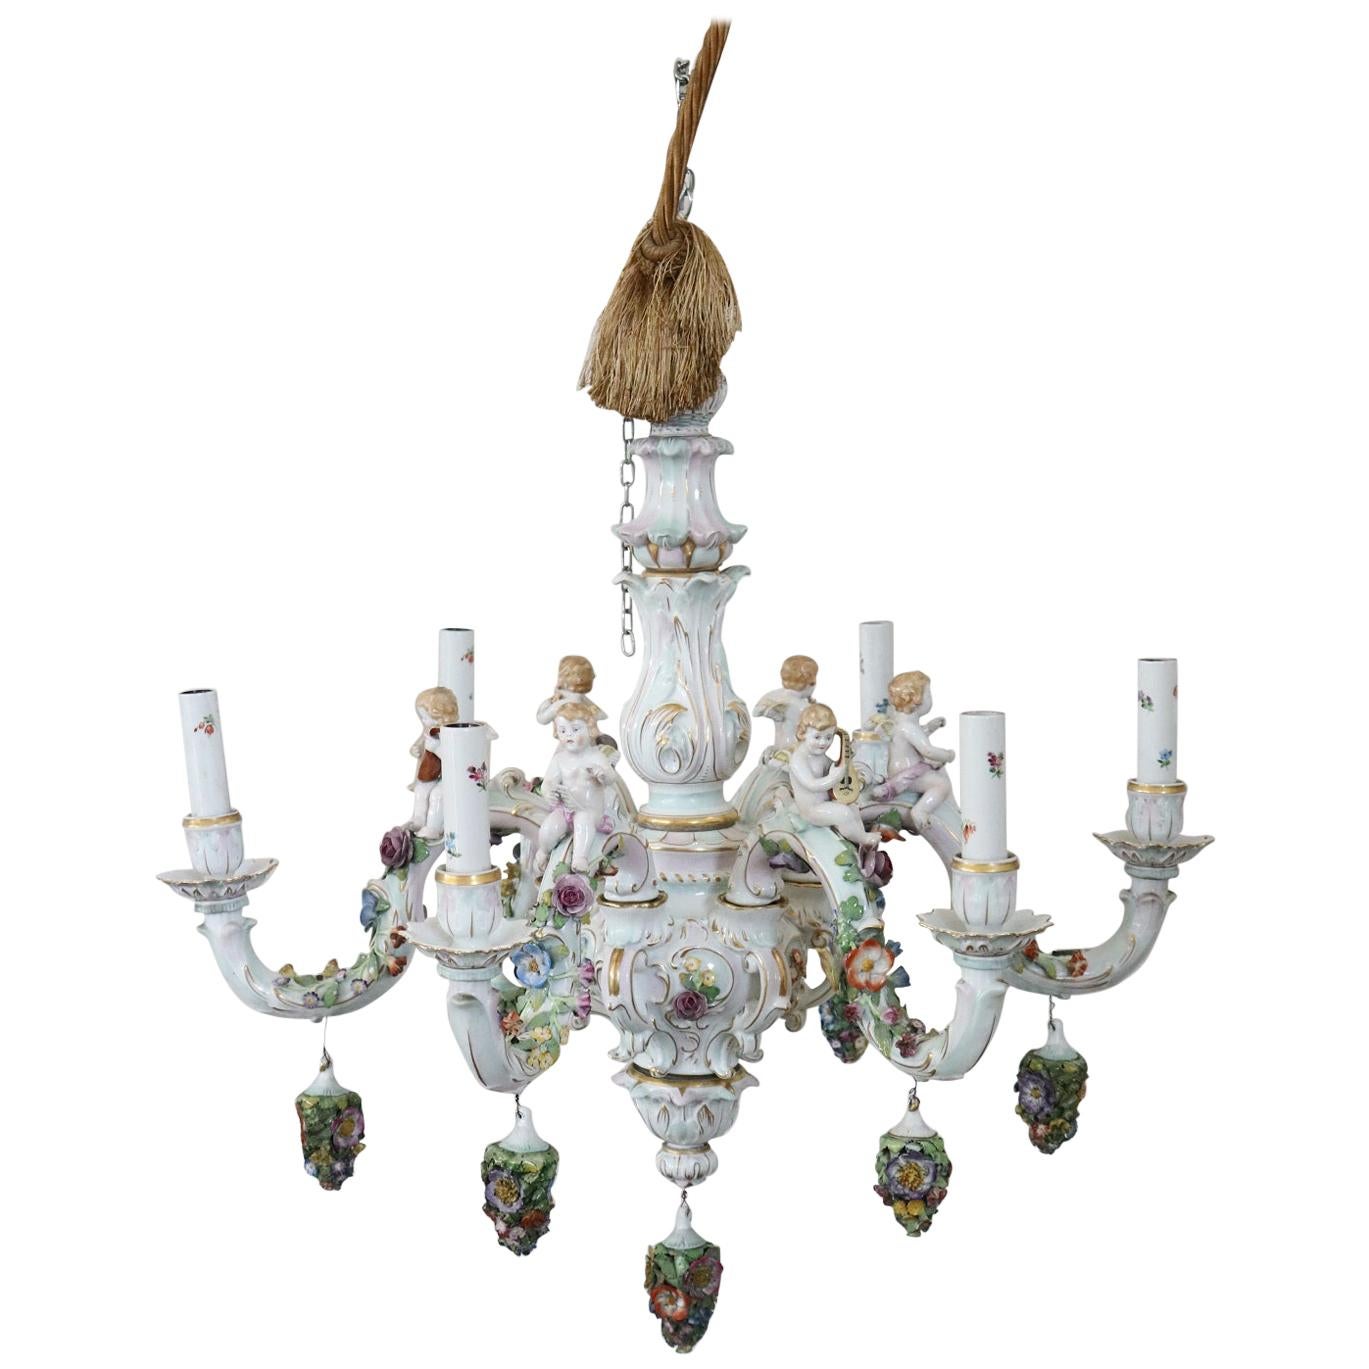 20th Century Italian Porcelain Chandelier Decorated with Flowers and Cherubs